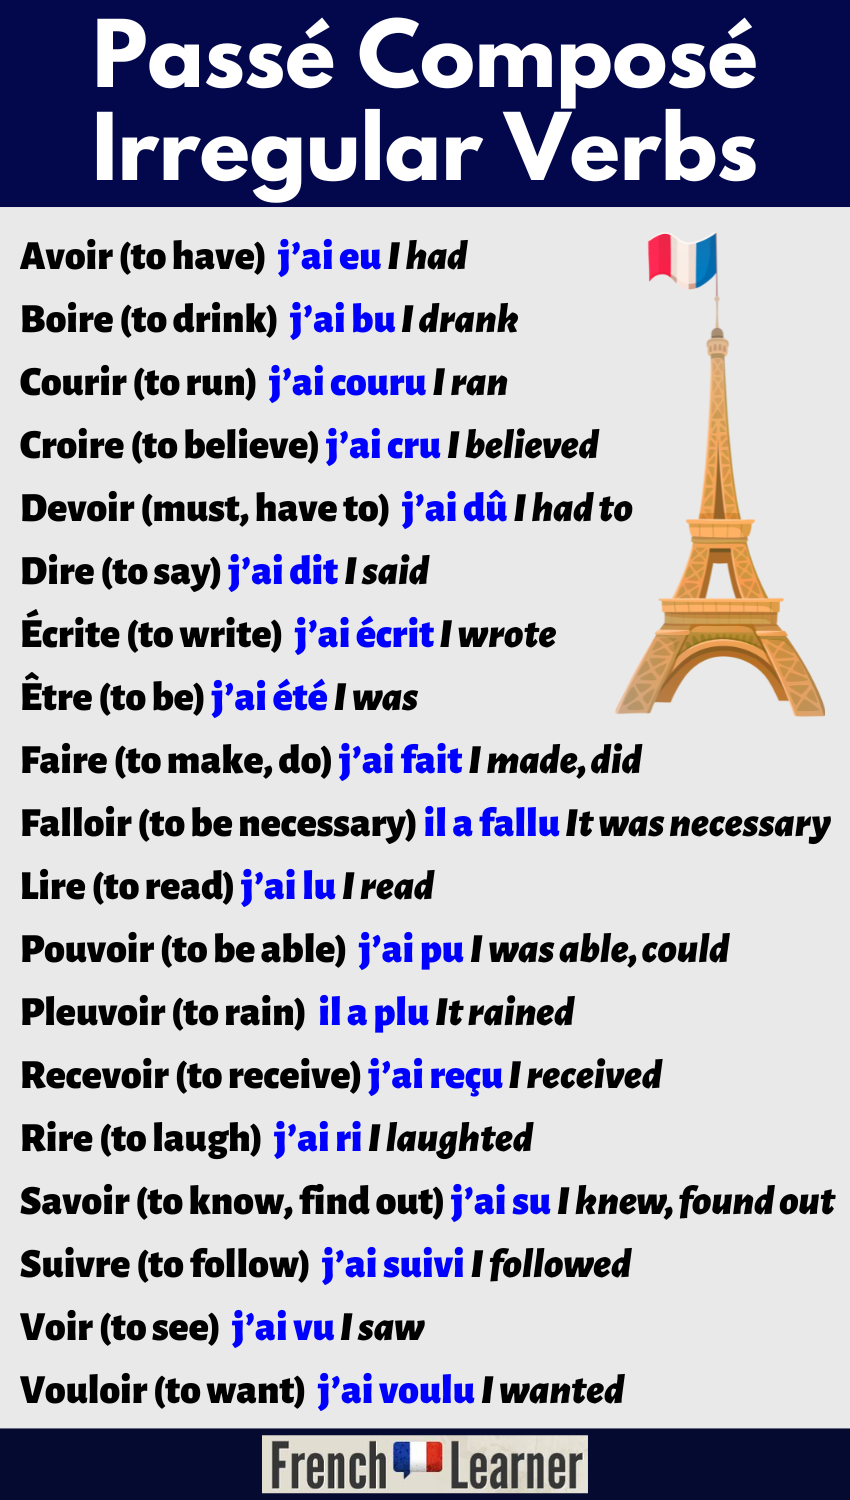 Passe compose irregular verbs FrenchLearner